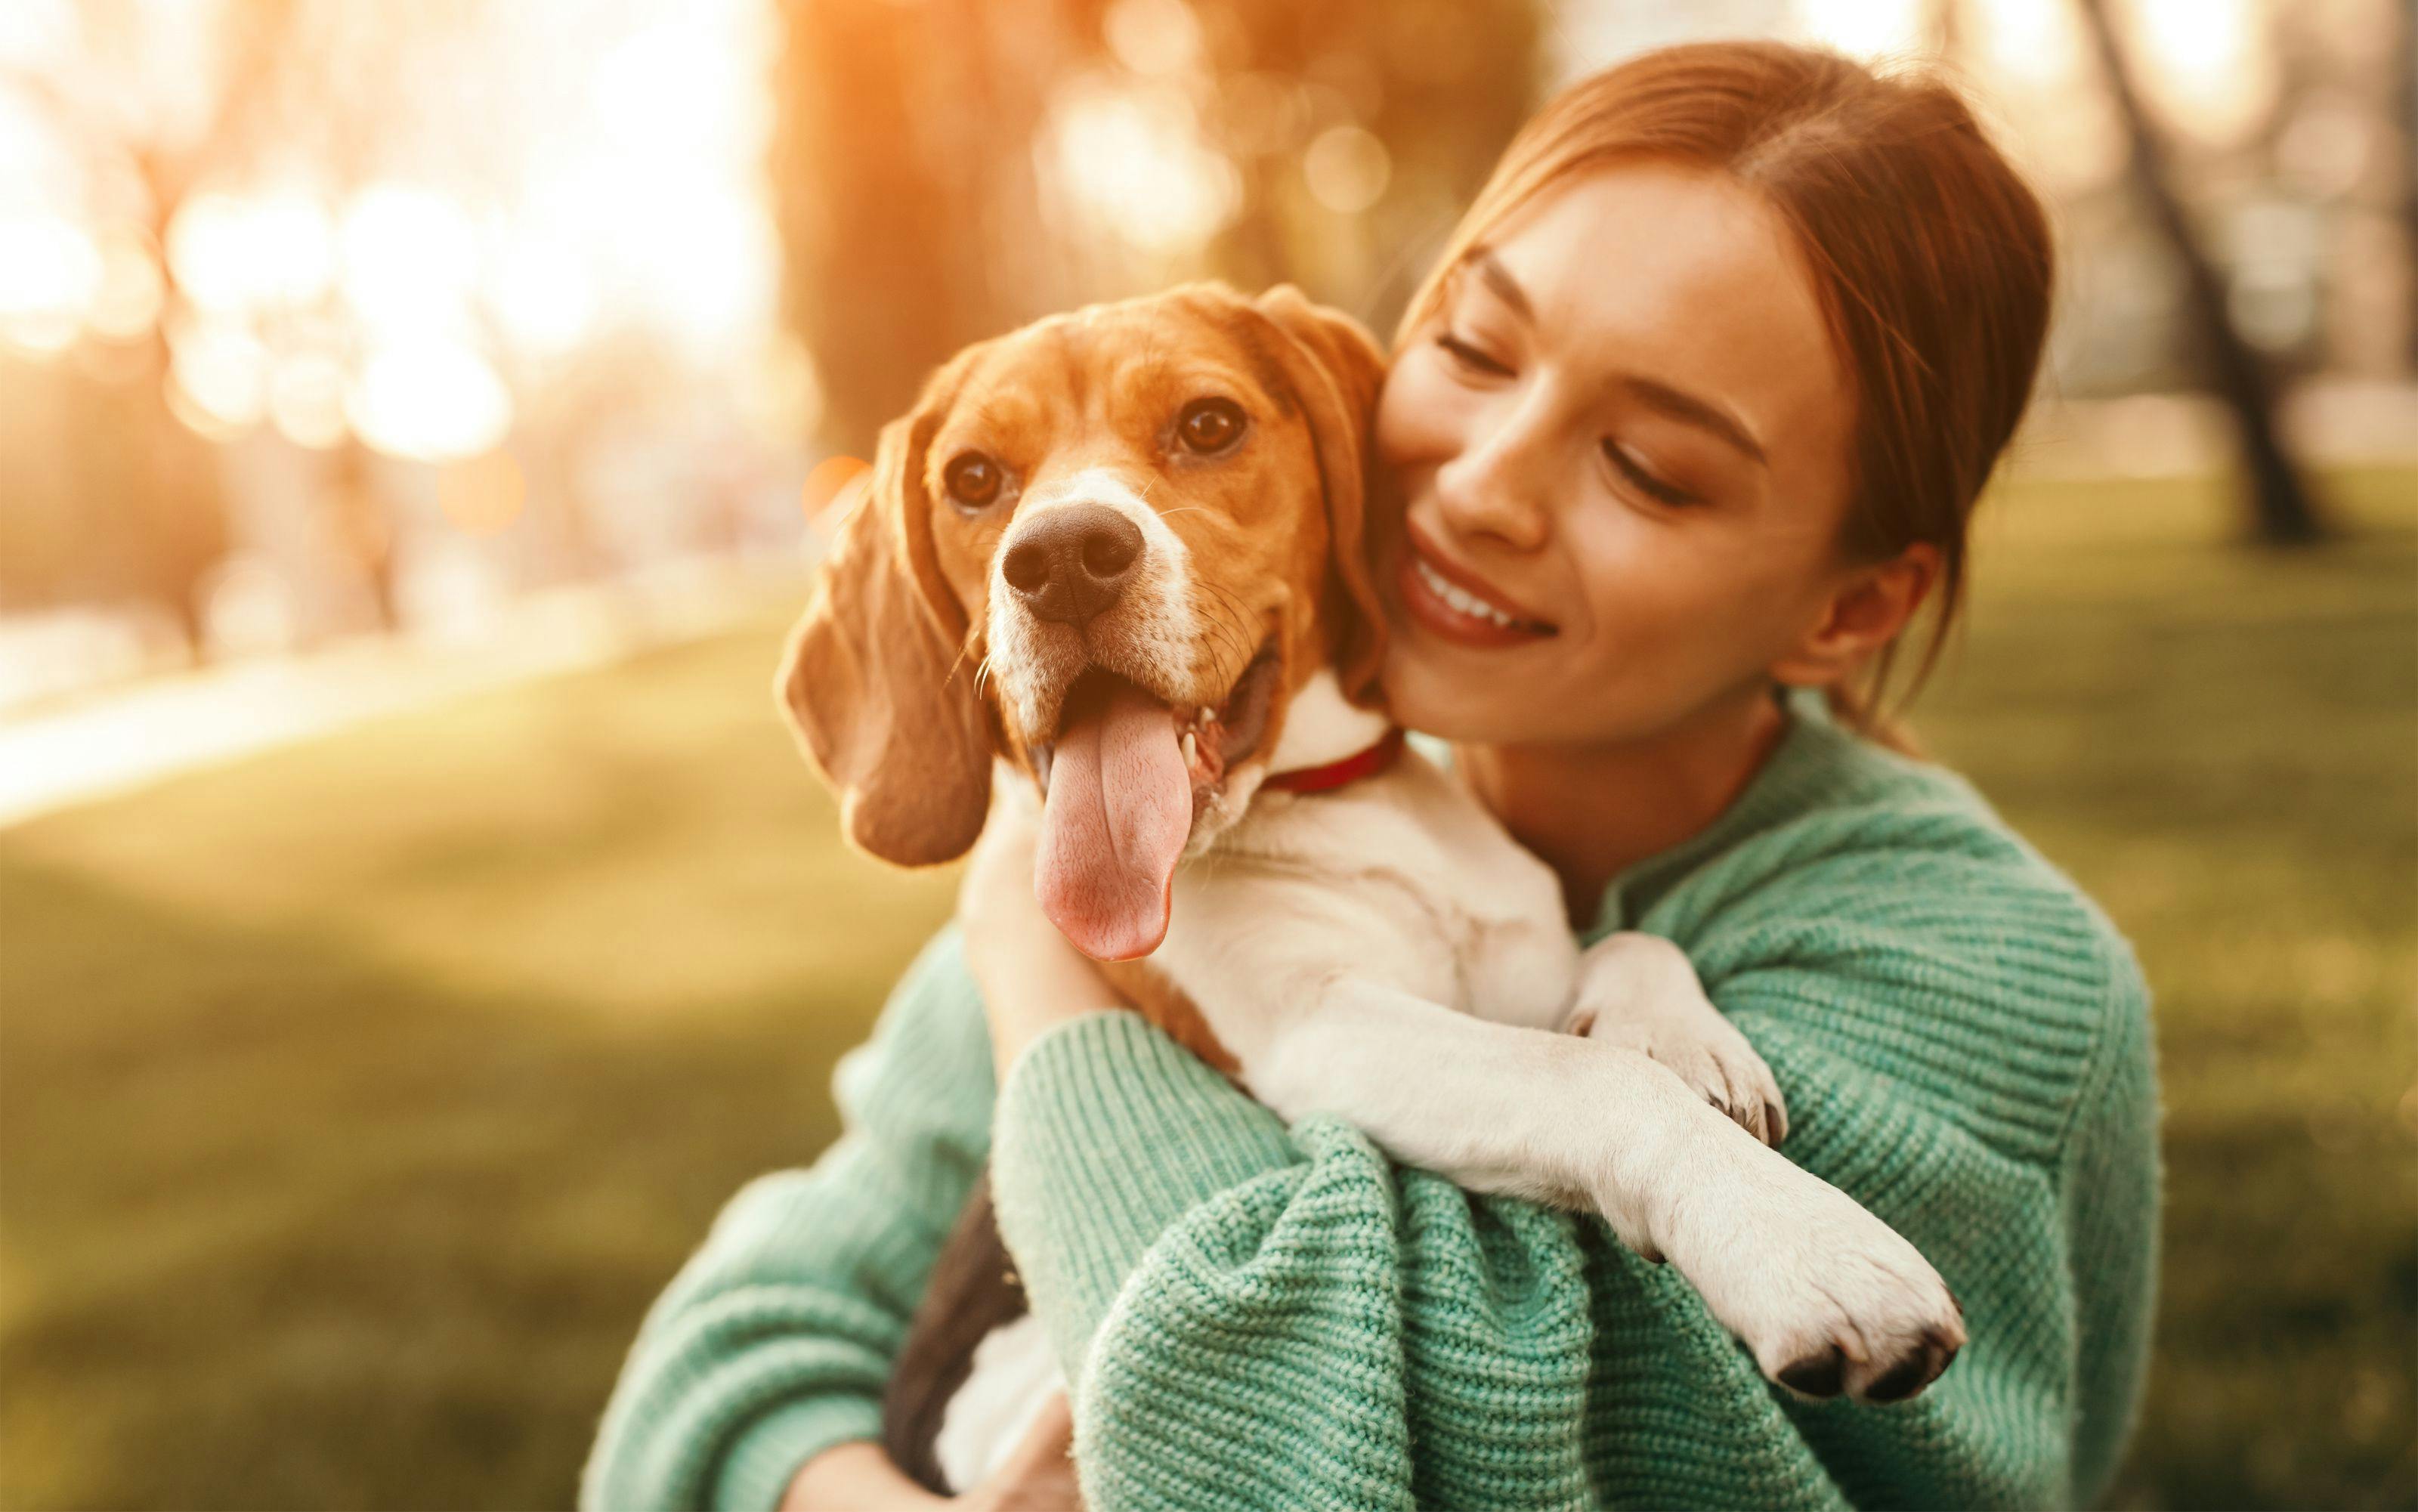 Freshpet joins forces with actress and animal rescue advocate to fund animal shelters 